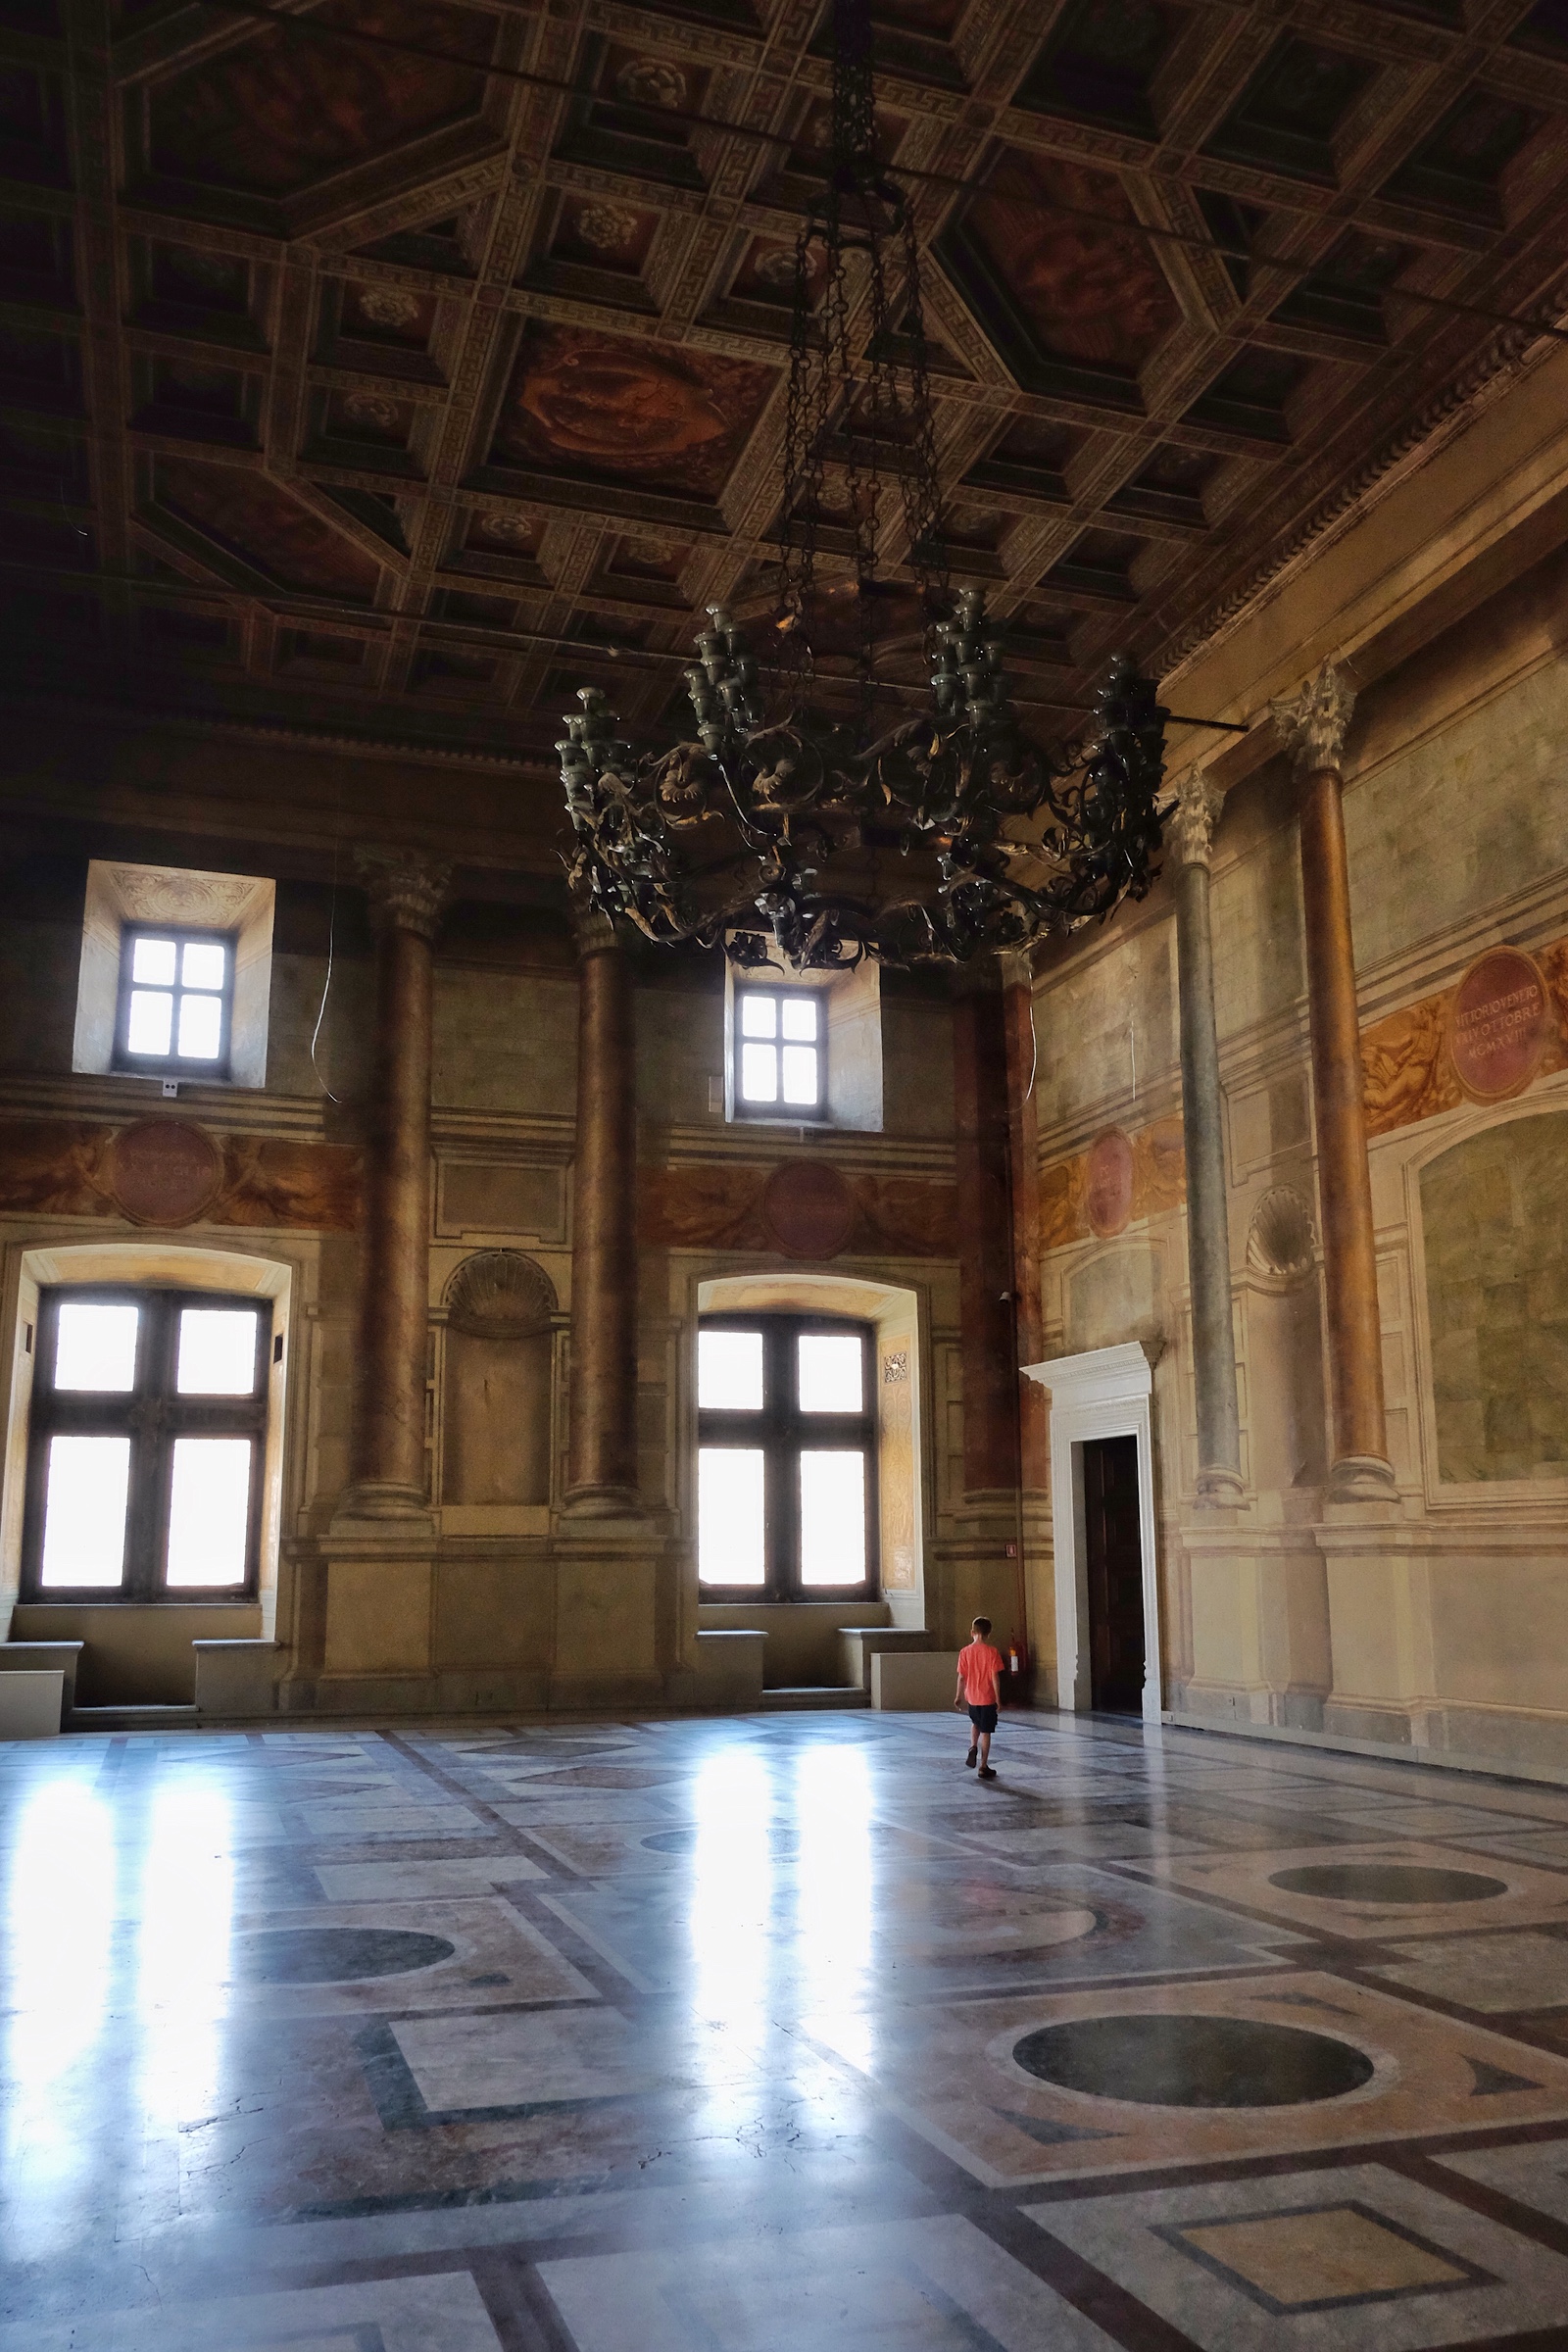 Rowan strolling through one of the gorgeous rooms in Palazzo Venezia.